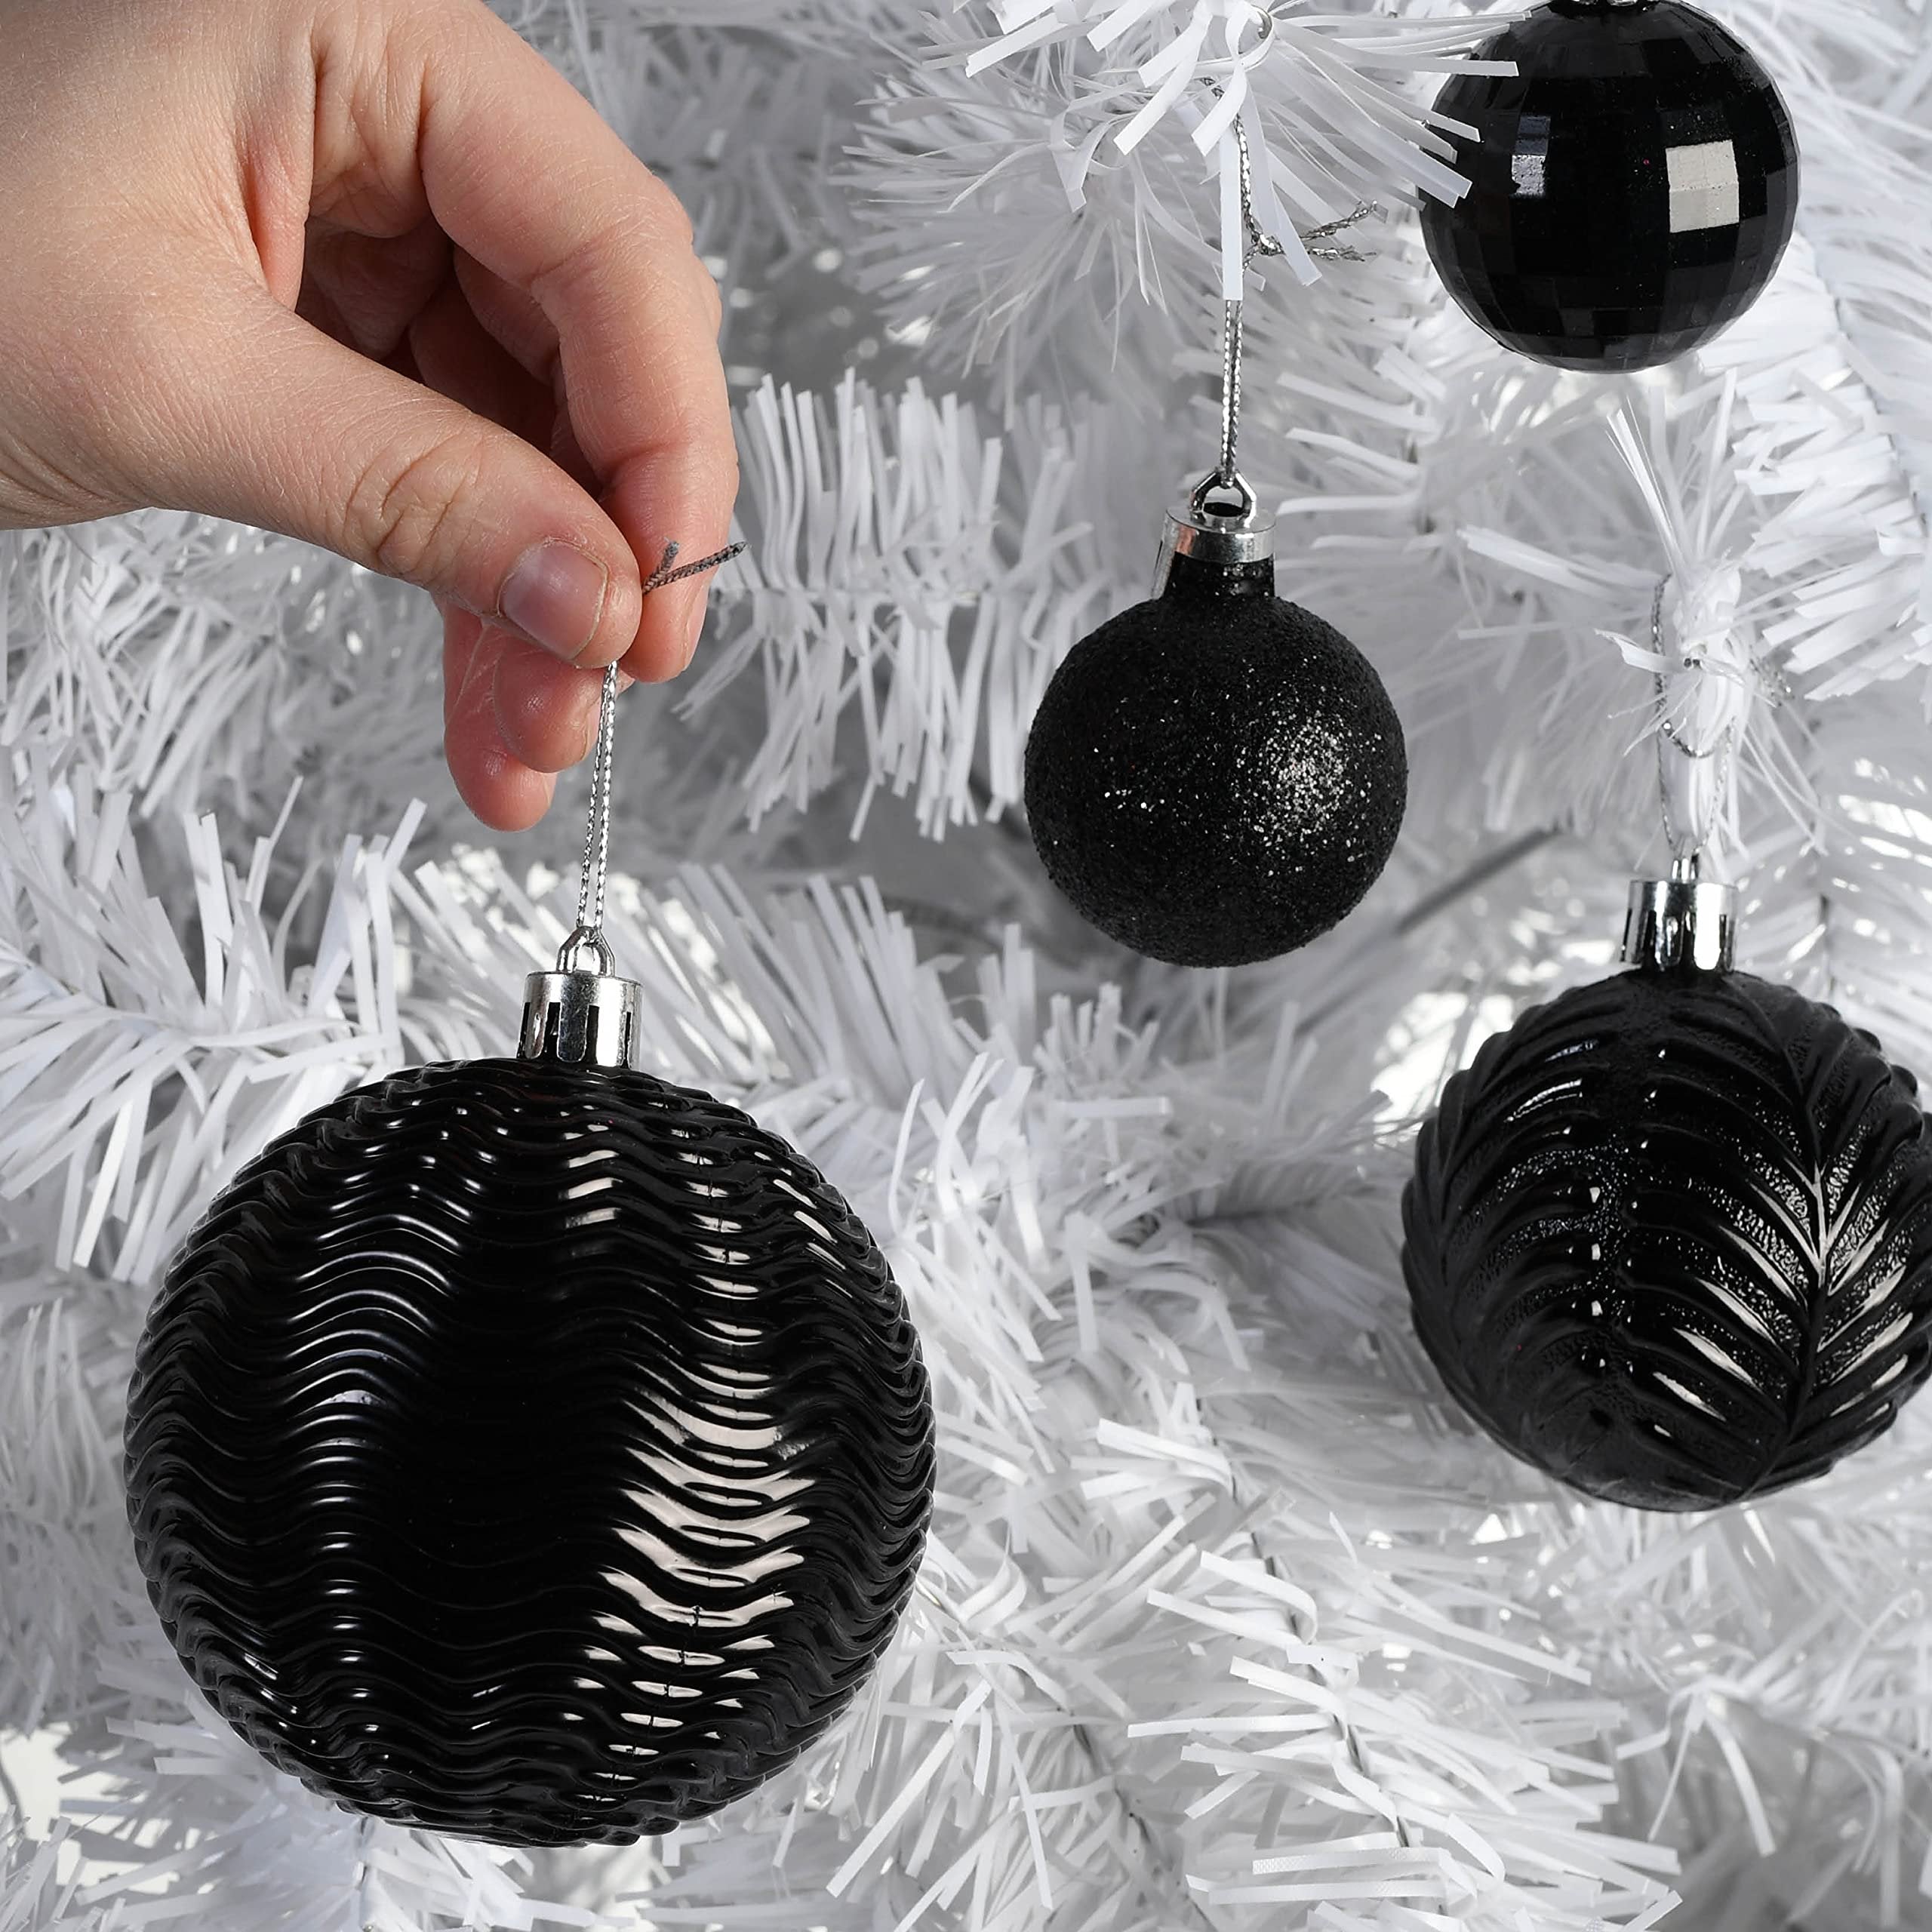 Prextex Christmas Ball Black Ornaments for Christmas Decorations (Black) - 36 pcs Shatterproof Black Christmas Ornaments w/Hanging Loop for Holiday, Wreath & Party Decorations (6 Styles, 3 Sizes)